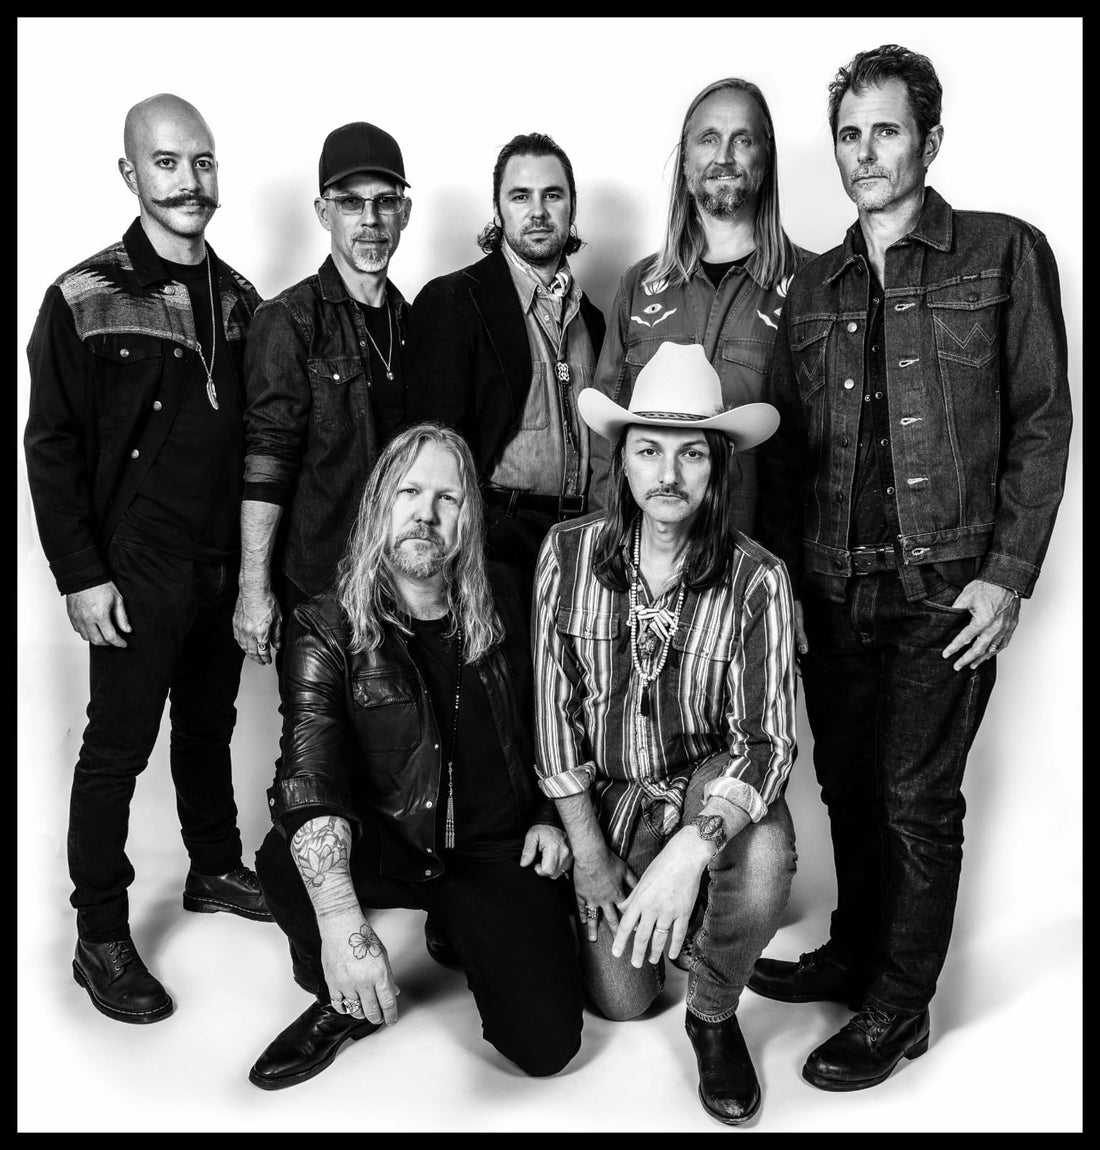 Justin - Silk Scarves And The Allman Betts Band